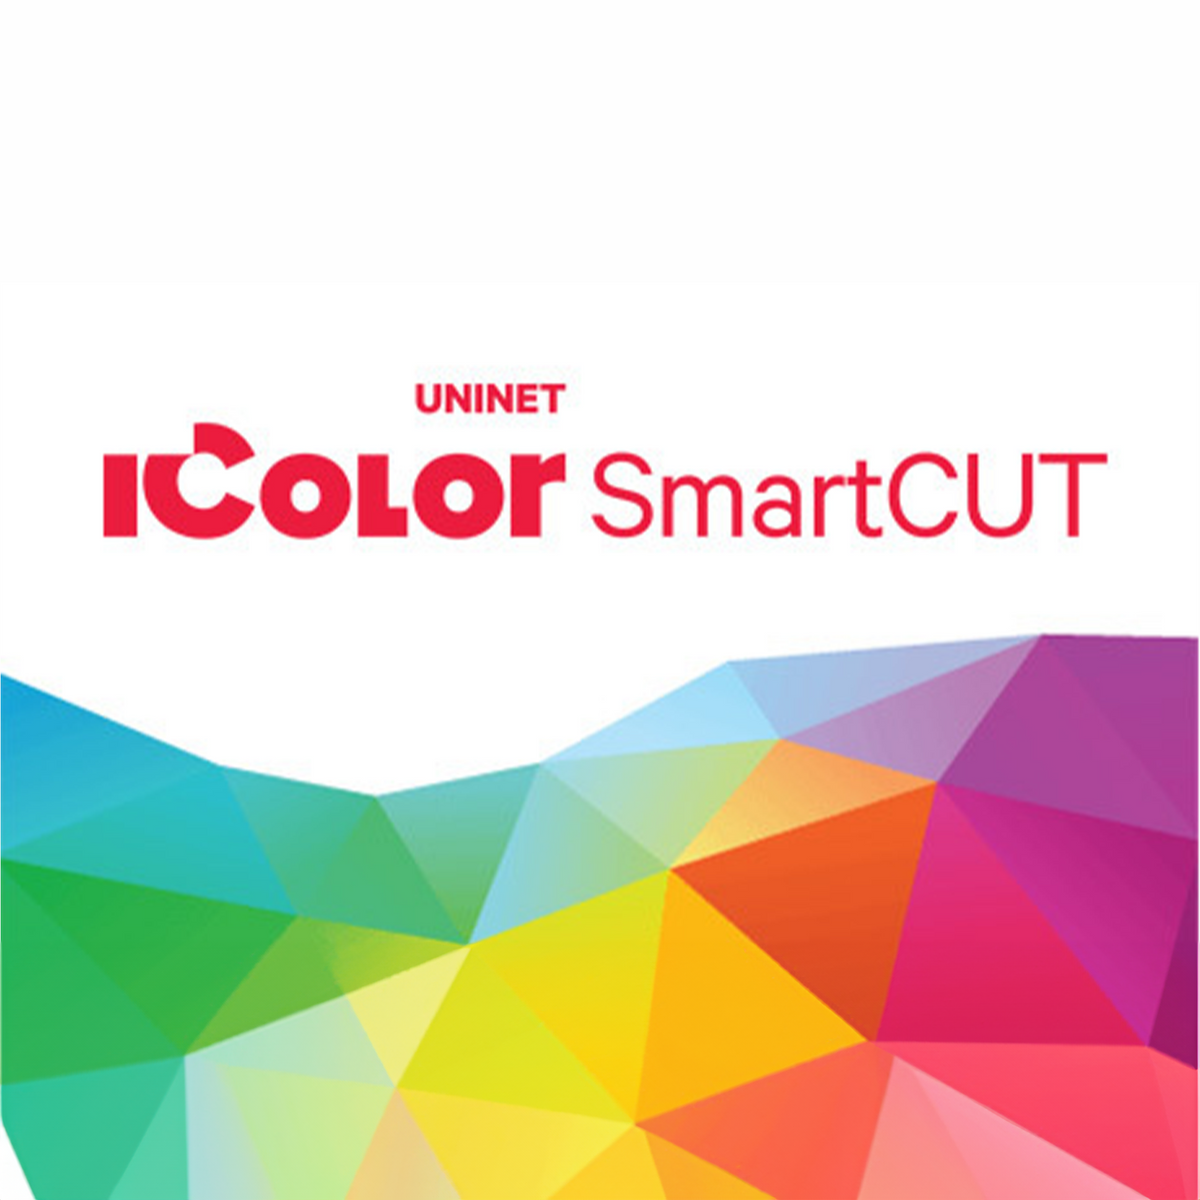 IColor SmartCUT Dongle and Software